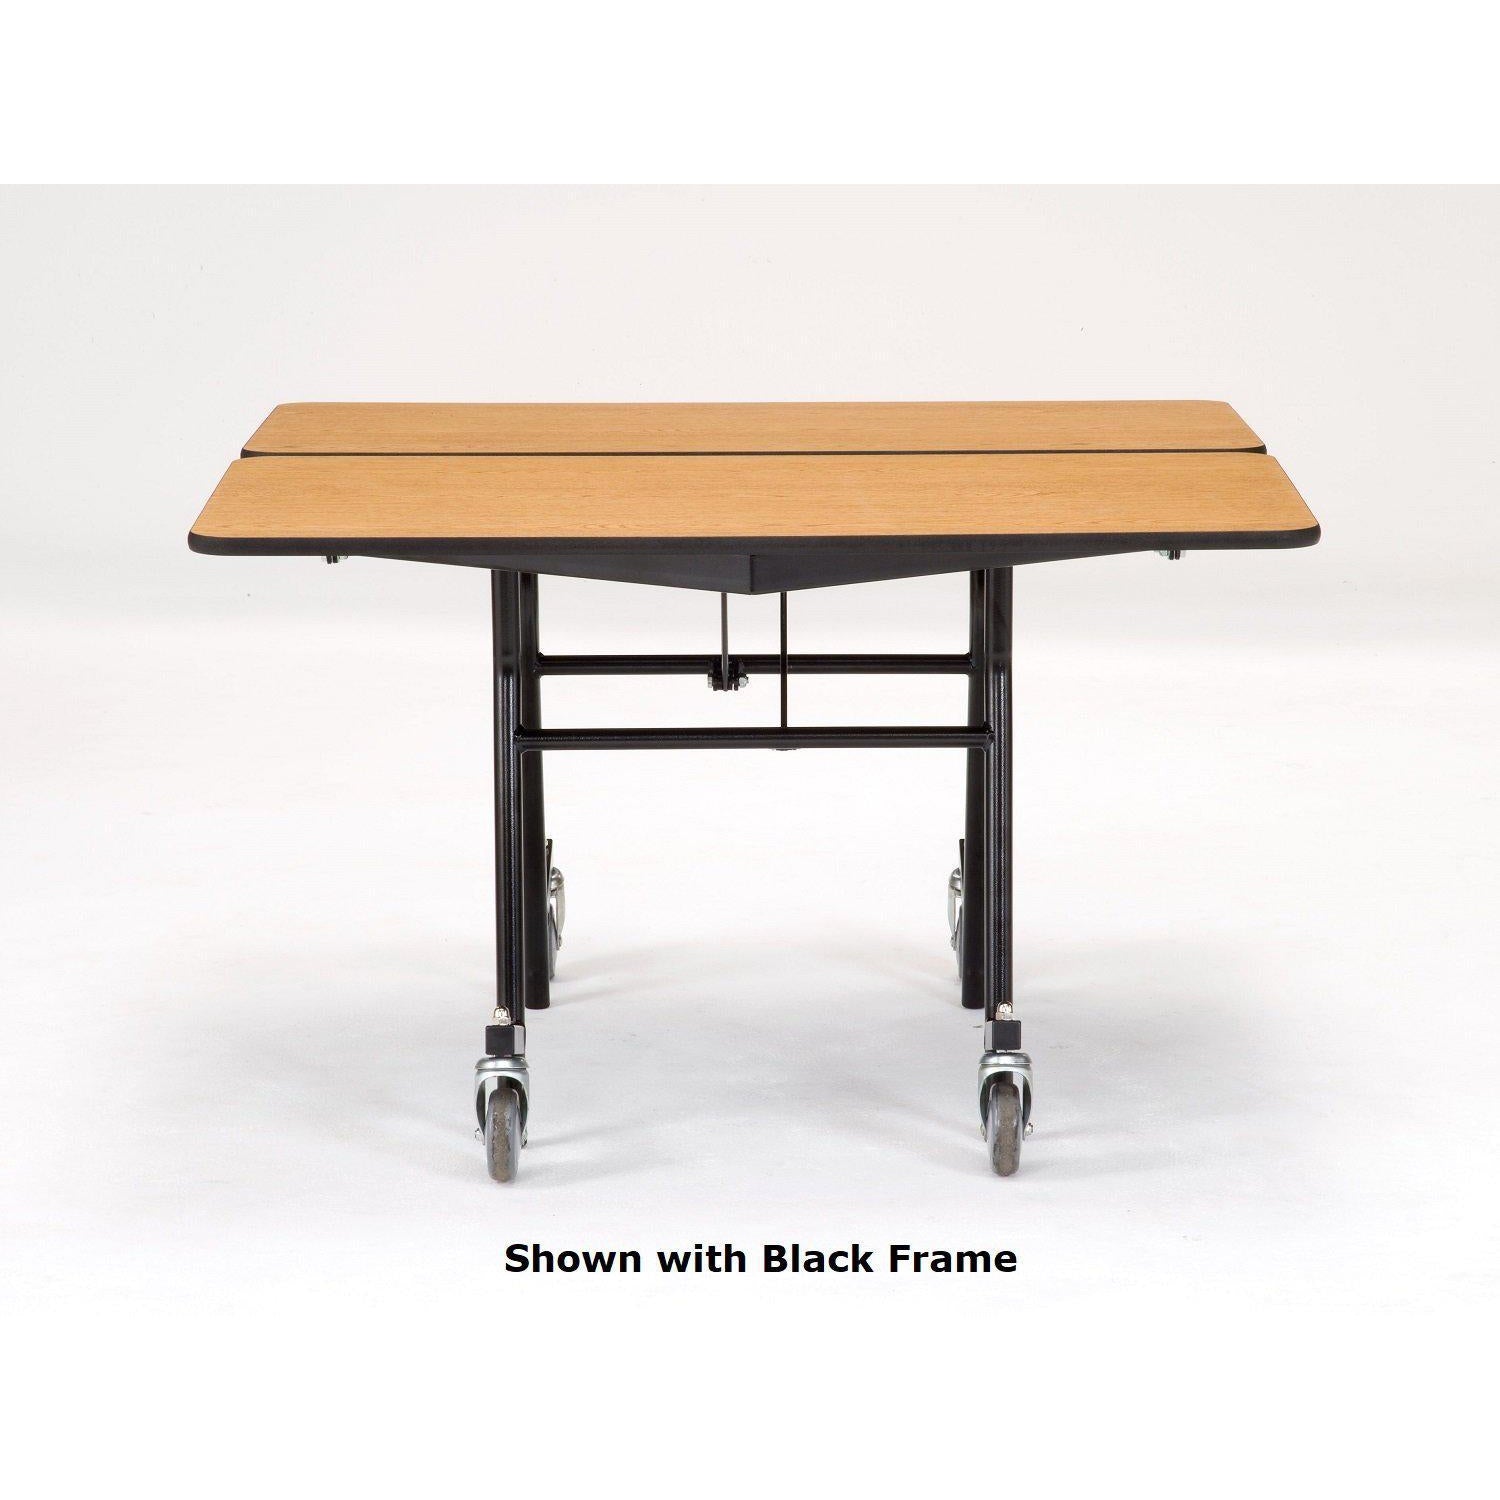 Mobile Shape Cafeteria Table, 48" Square, Plywood Core, Vinyl T-Mold Edge, Textured Black Frame